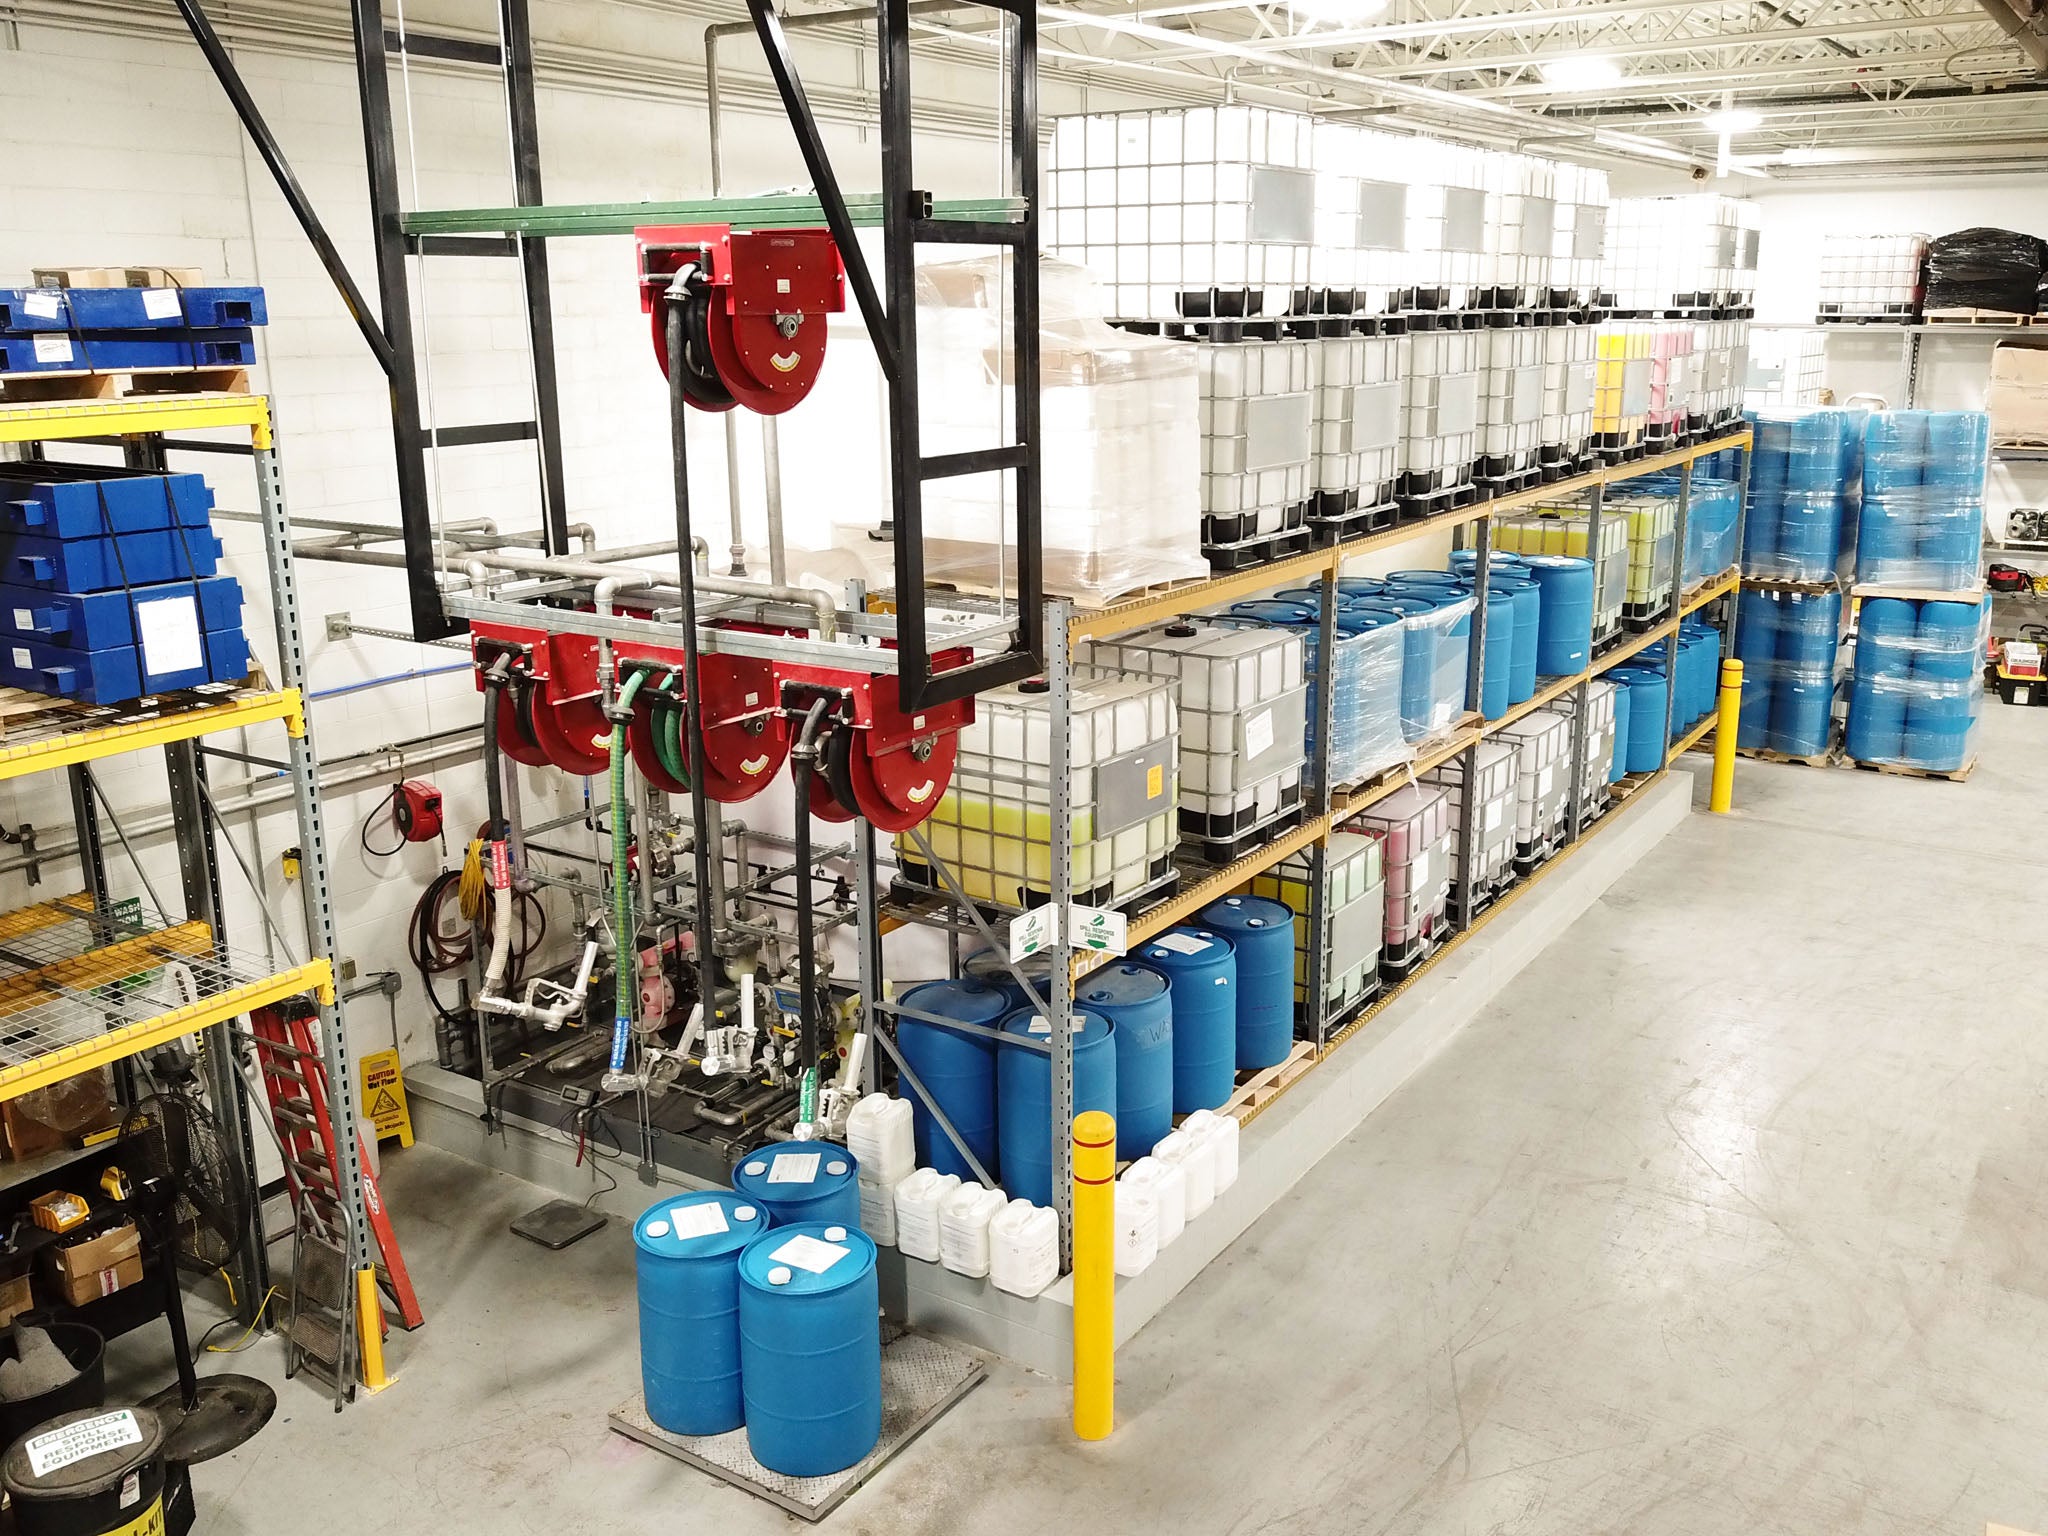 The high purity glycol fluid is mixed with purified, deionized water at our in-house facility. Our heat transfer specialists can also custom mix concentrations outside of what is available above.